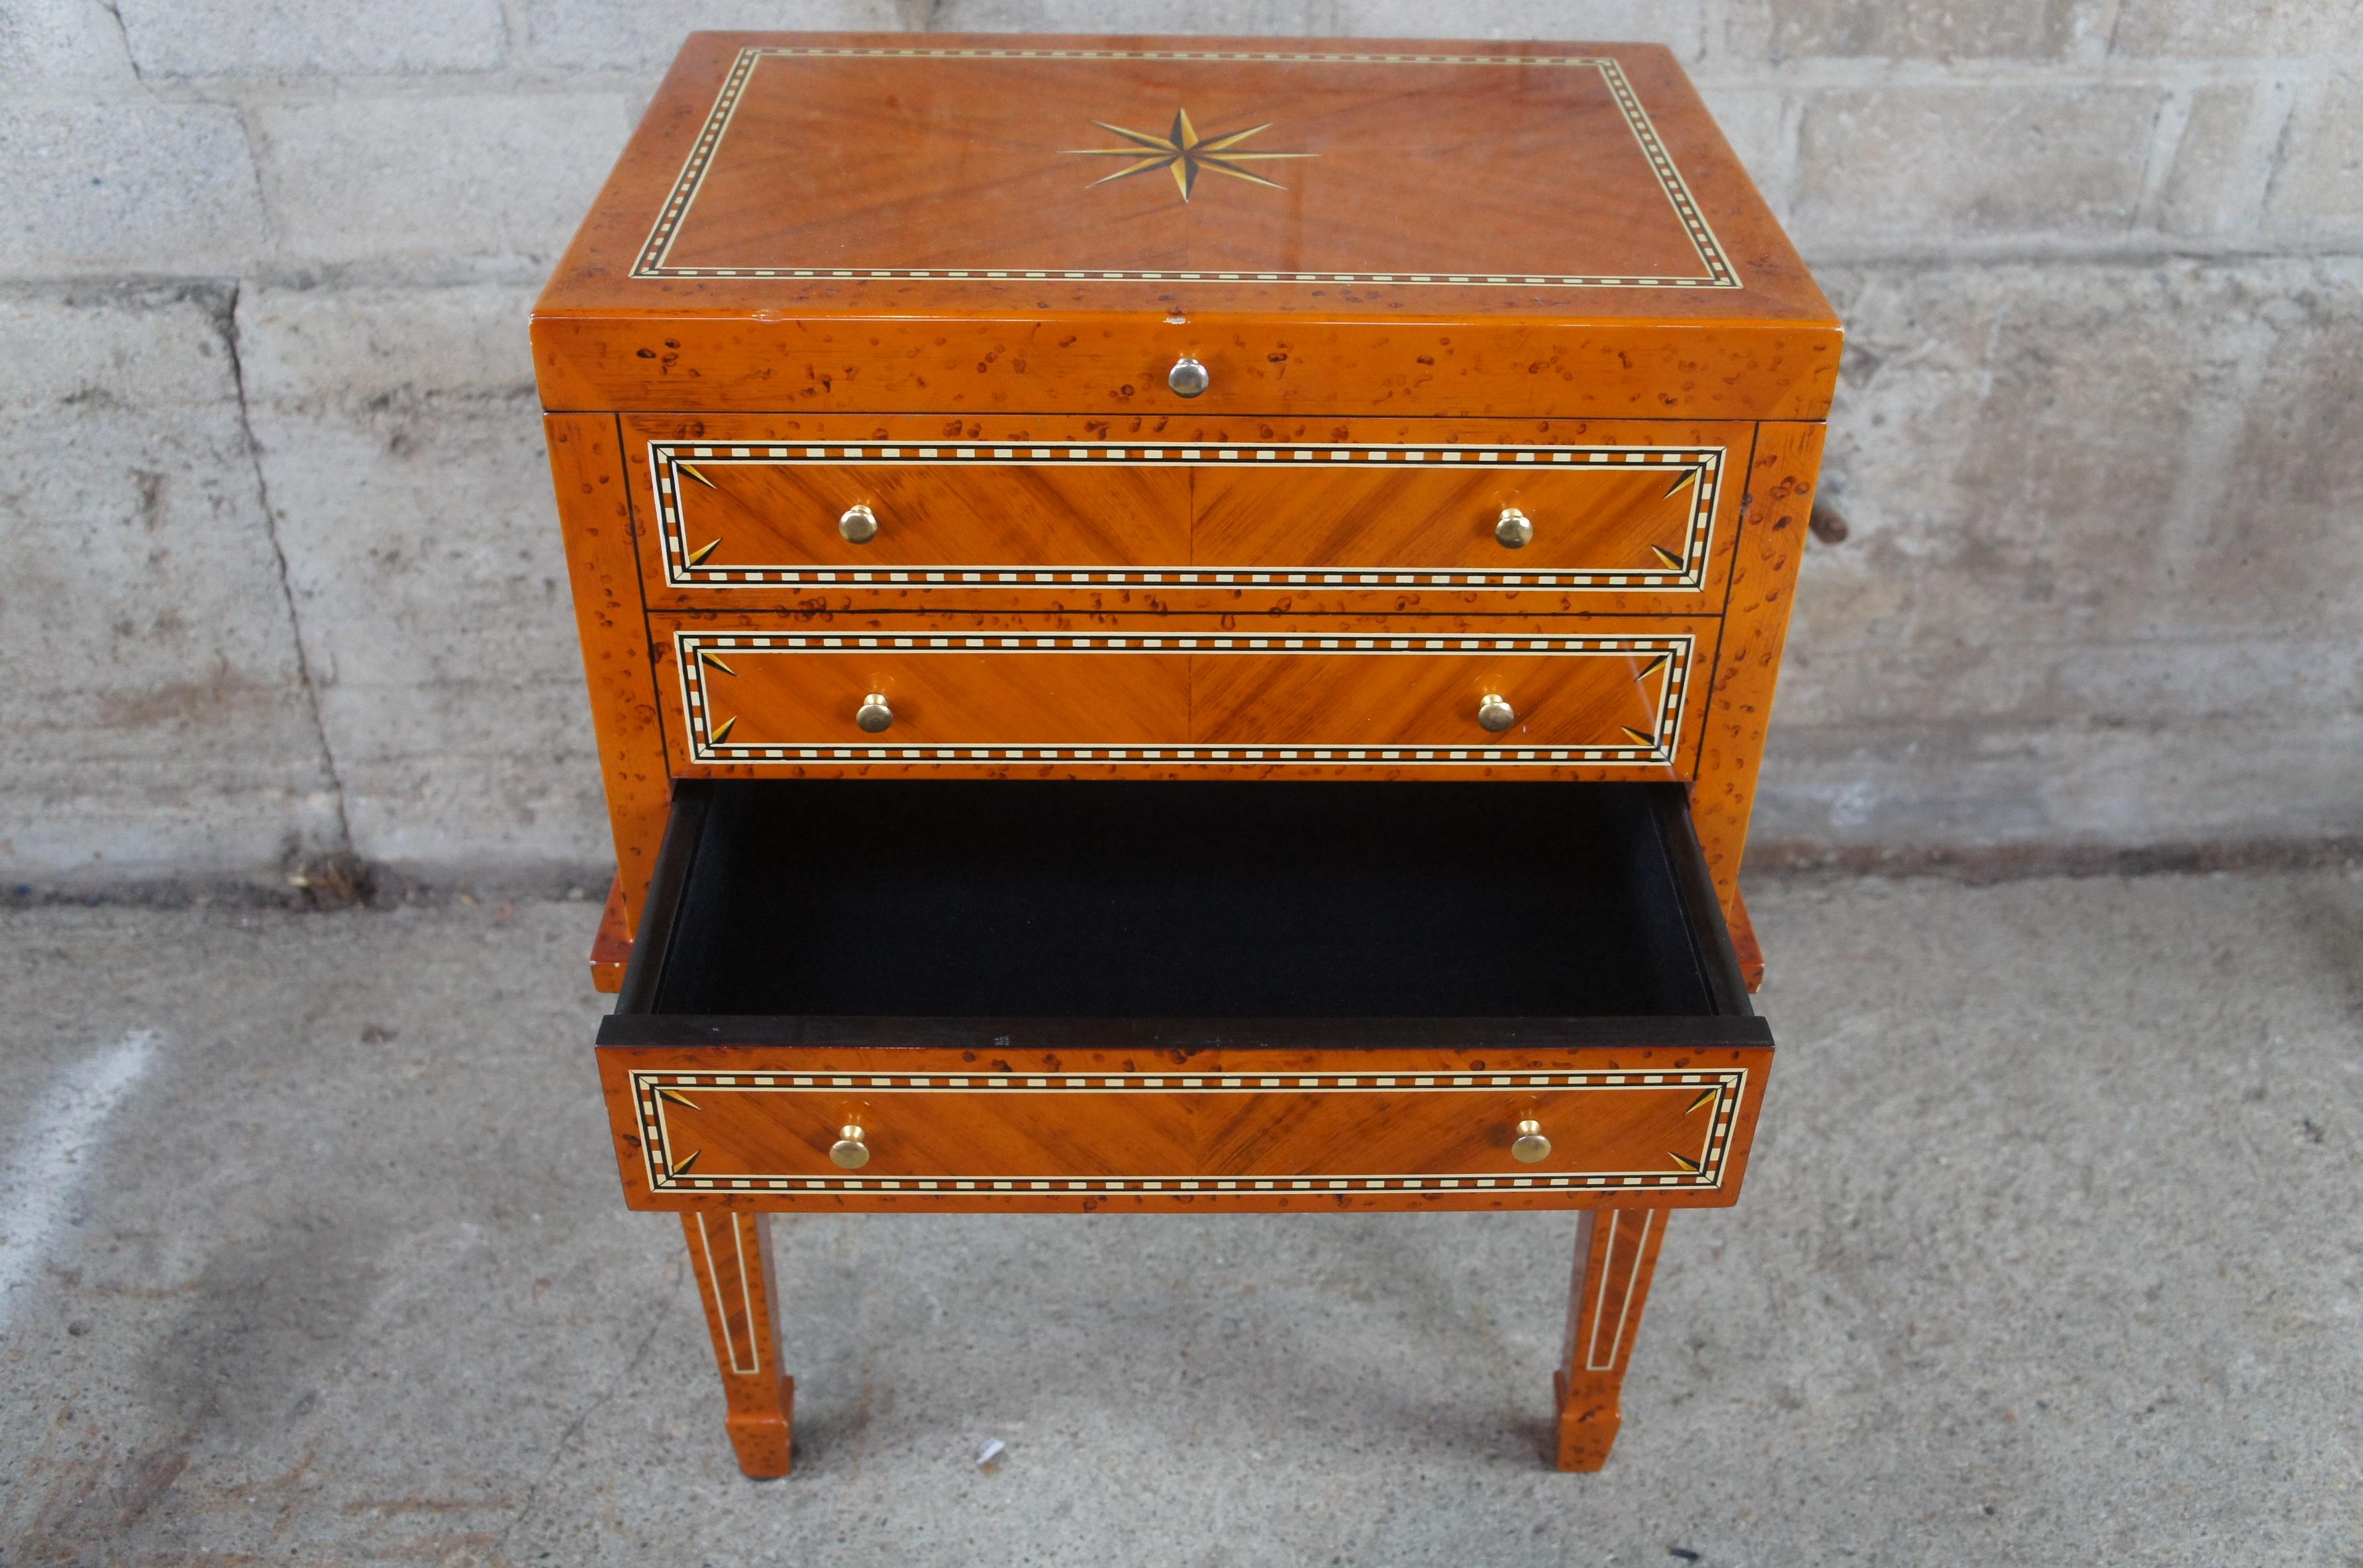 Hardwood Vtg Italian Parquetry Inlaid Cigar Humidor Chest on Stand Side Table Hepplewhite